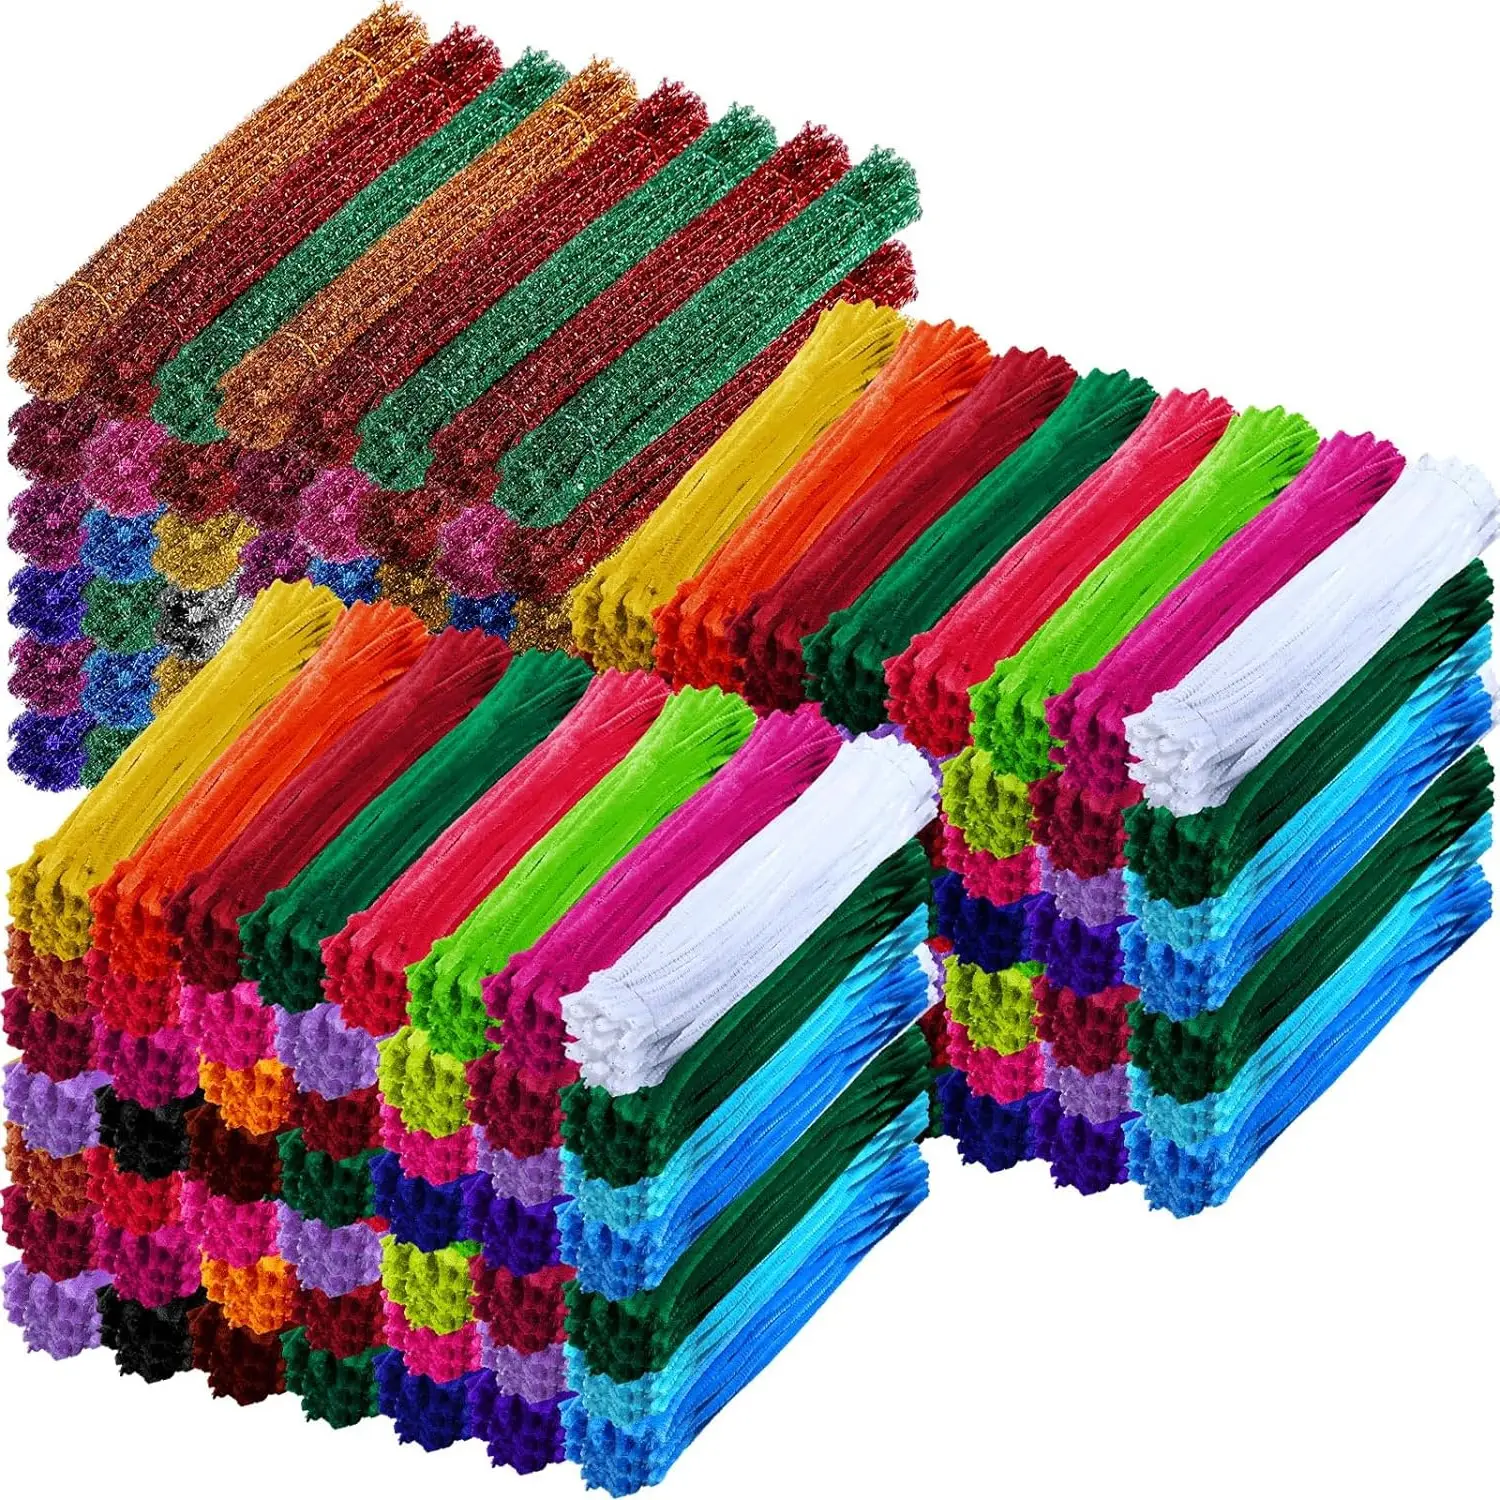 Colorful Chenille Craft Stems 100 Pack, educational toys for children -Safe and Flexible, Ideal for Kids' Creativity